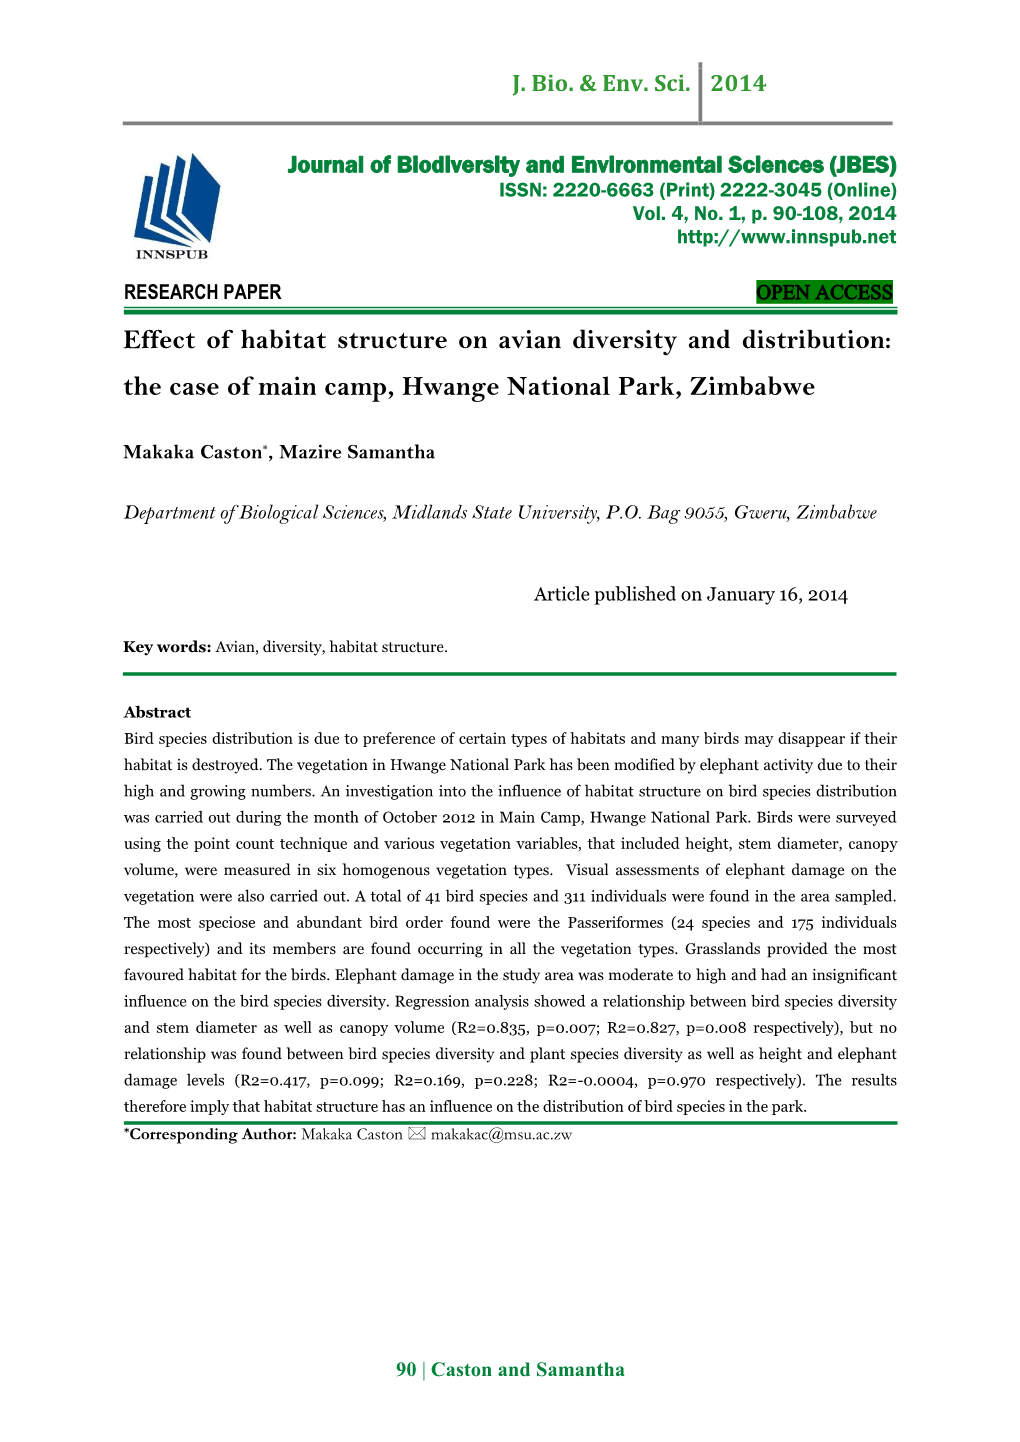 Effect of Habitat Structure on Avian Diversity and Distribution: the Case of Main Camp, Hwange National Park, Zimbabwe